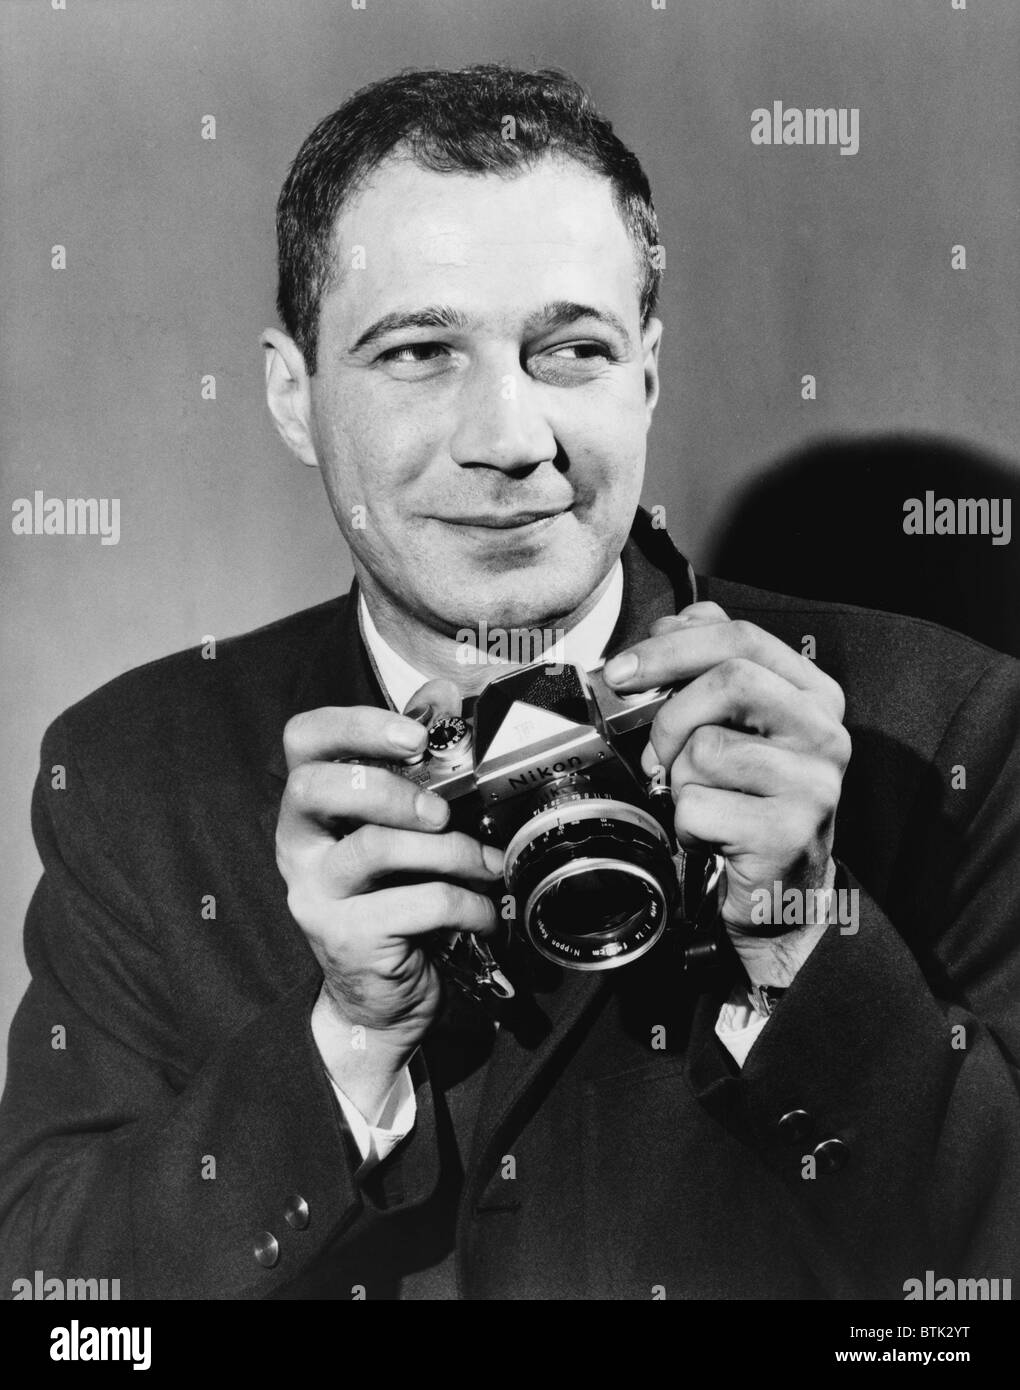 Eddie Adams (1933-2004), news photographer who won the Pulitzer Prize for his coverage of the Tet Offense in Saigon, Vietnam. 1965. Stock Photo